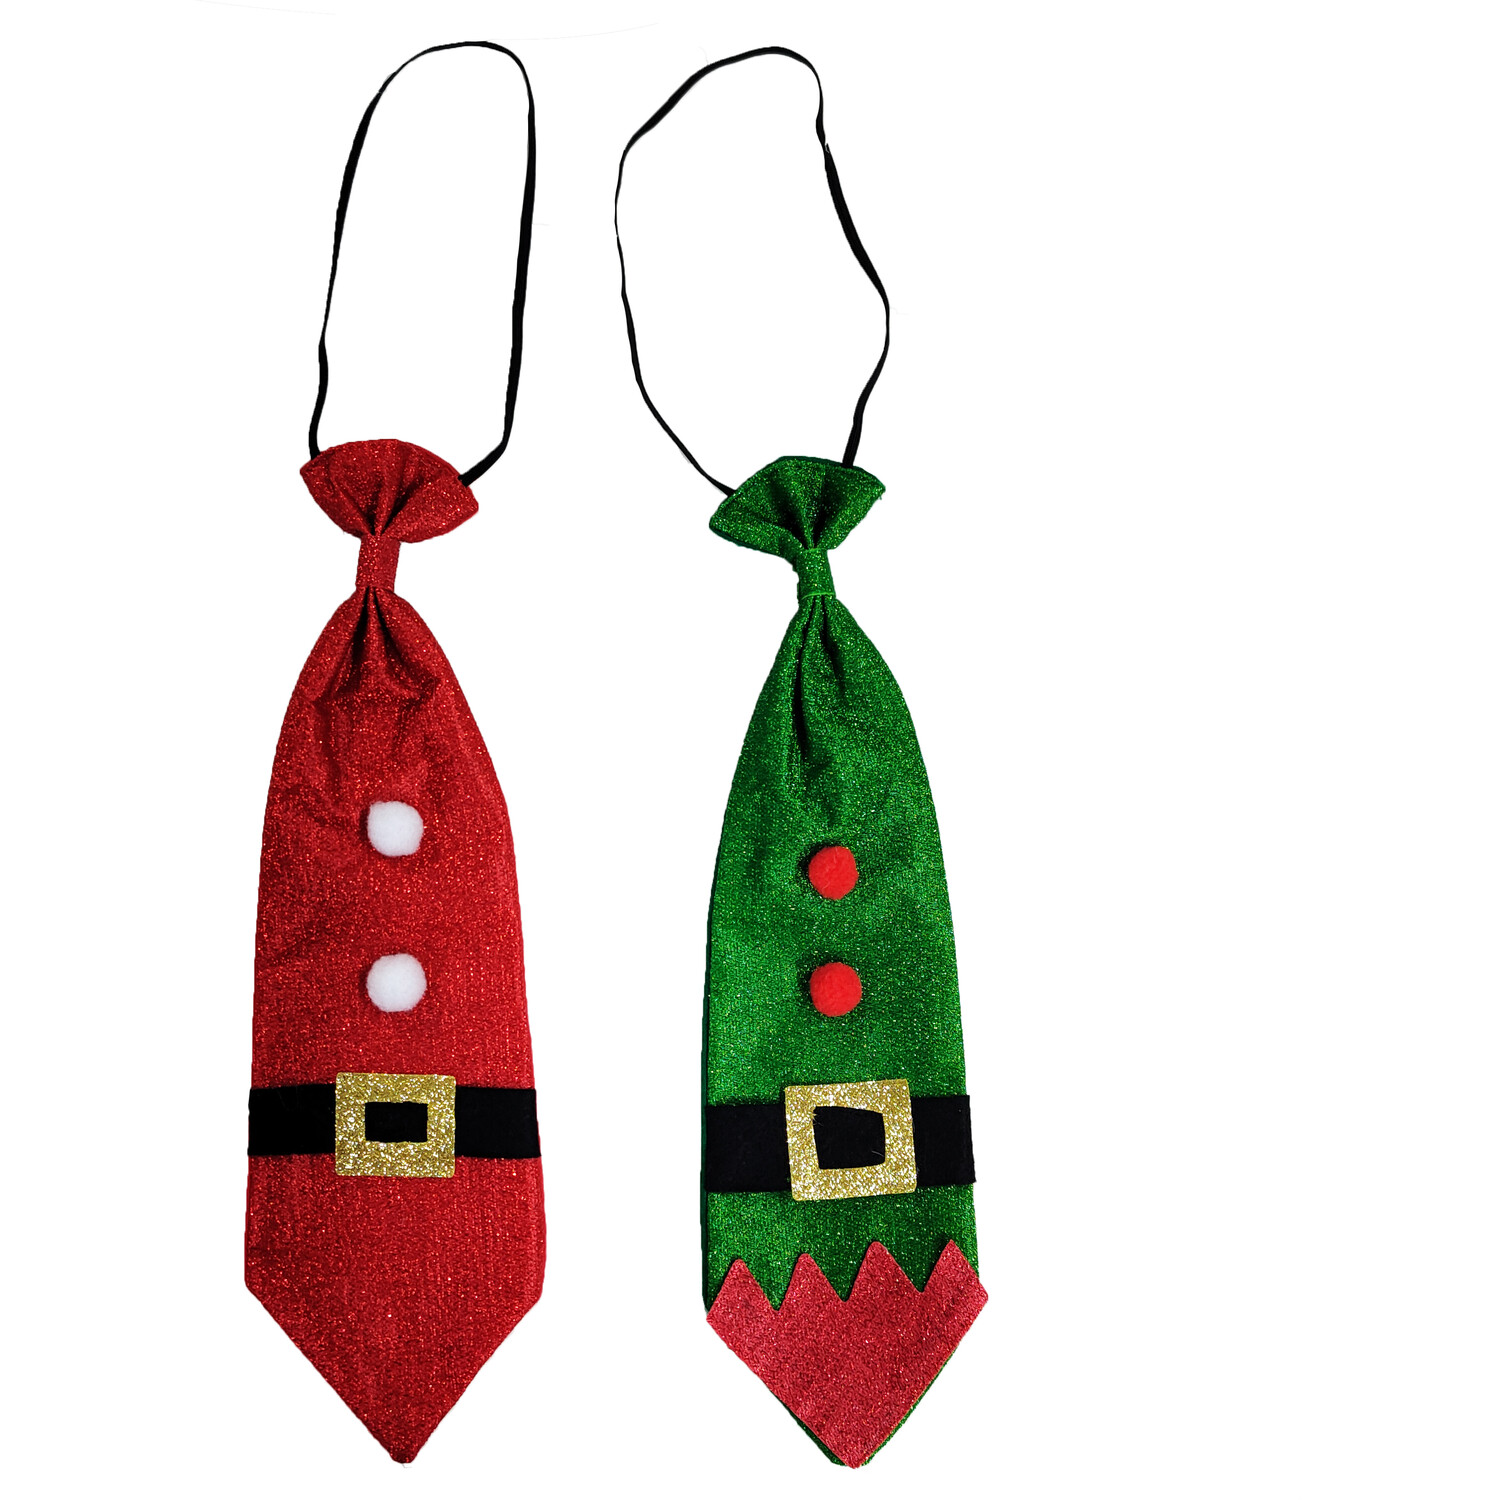 Novelty Chistmas Tie Image